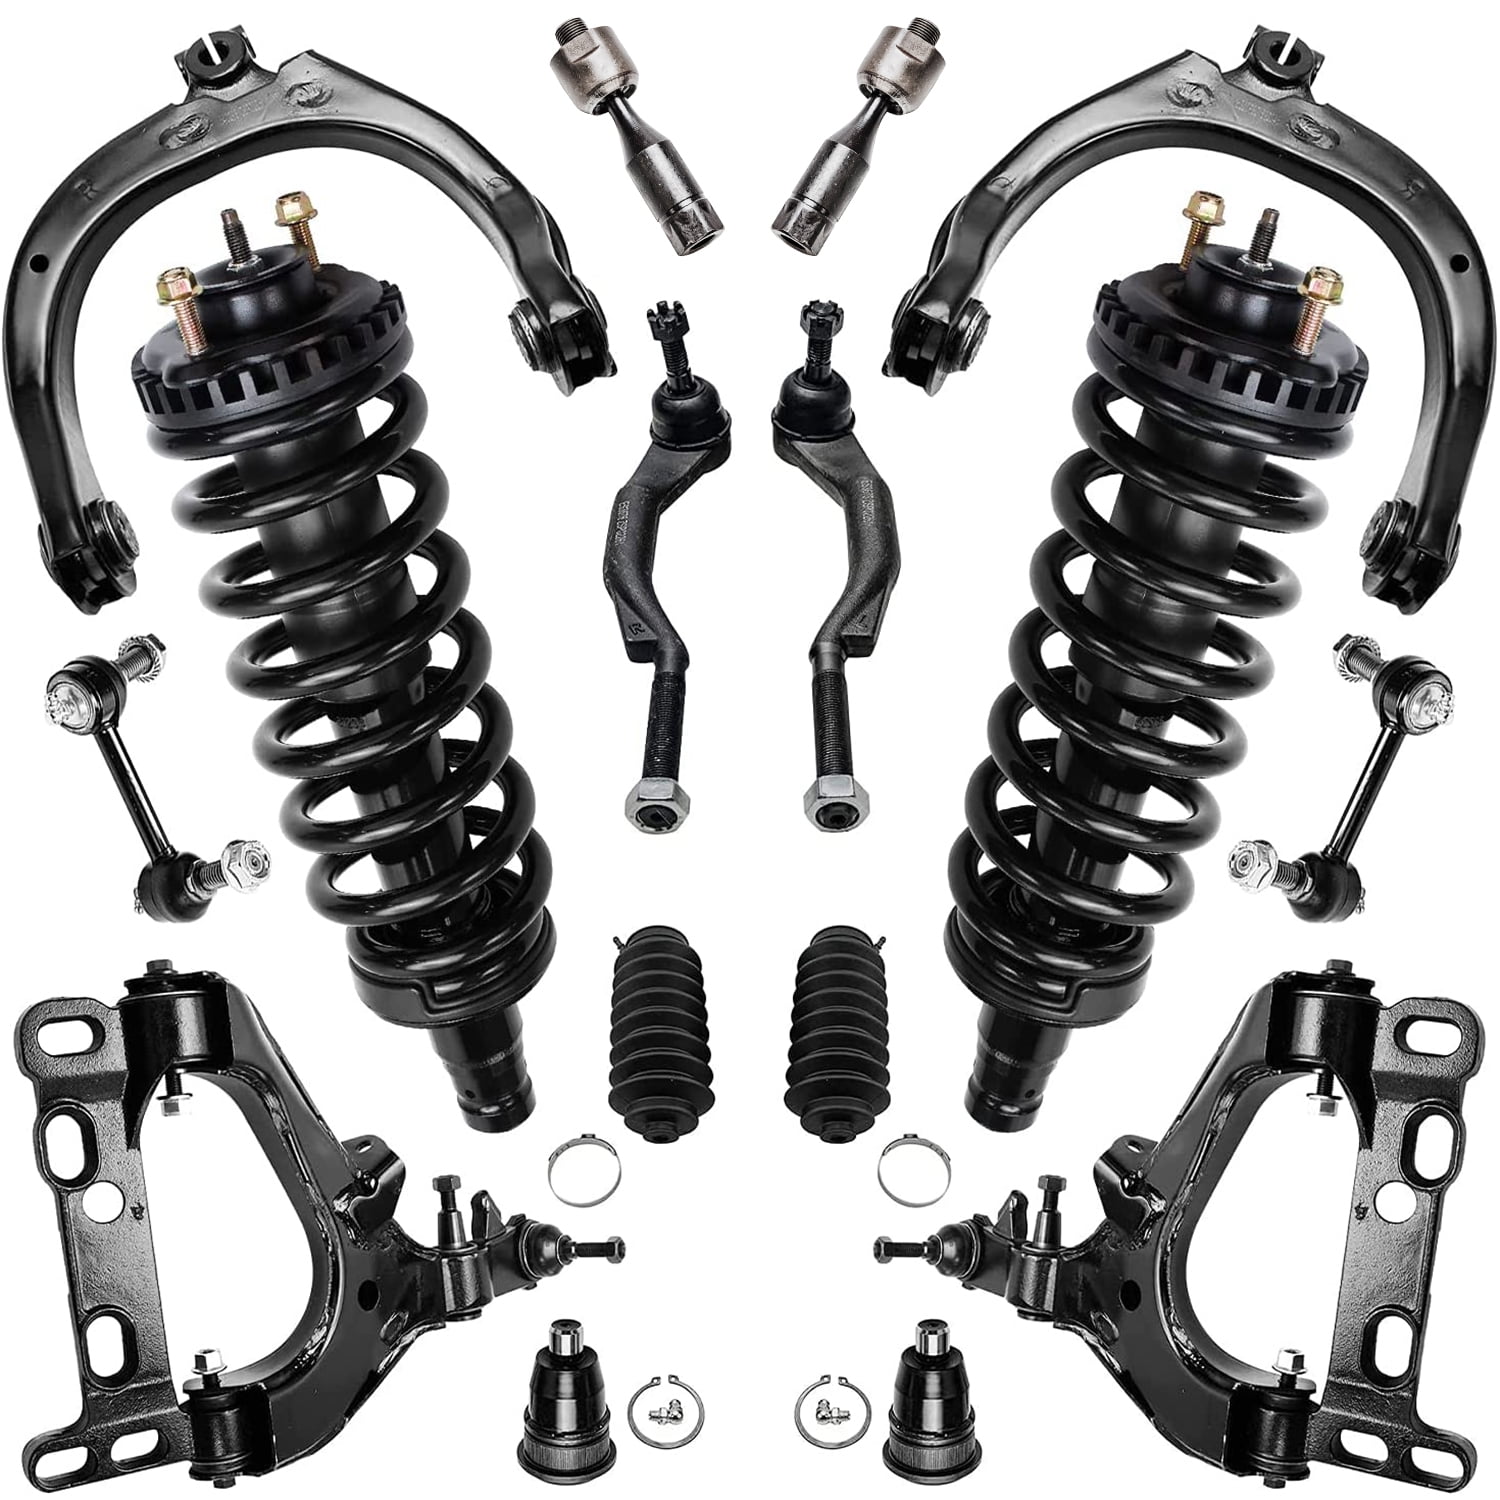 Detroit Axle 16pc Complete Front Suspension Kit for Chevy Trailblazer and  GMC Envoy